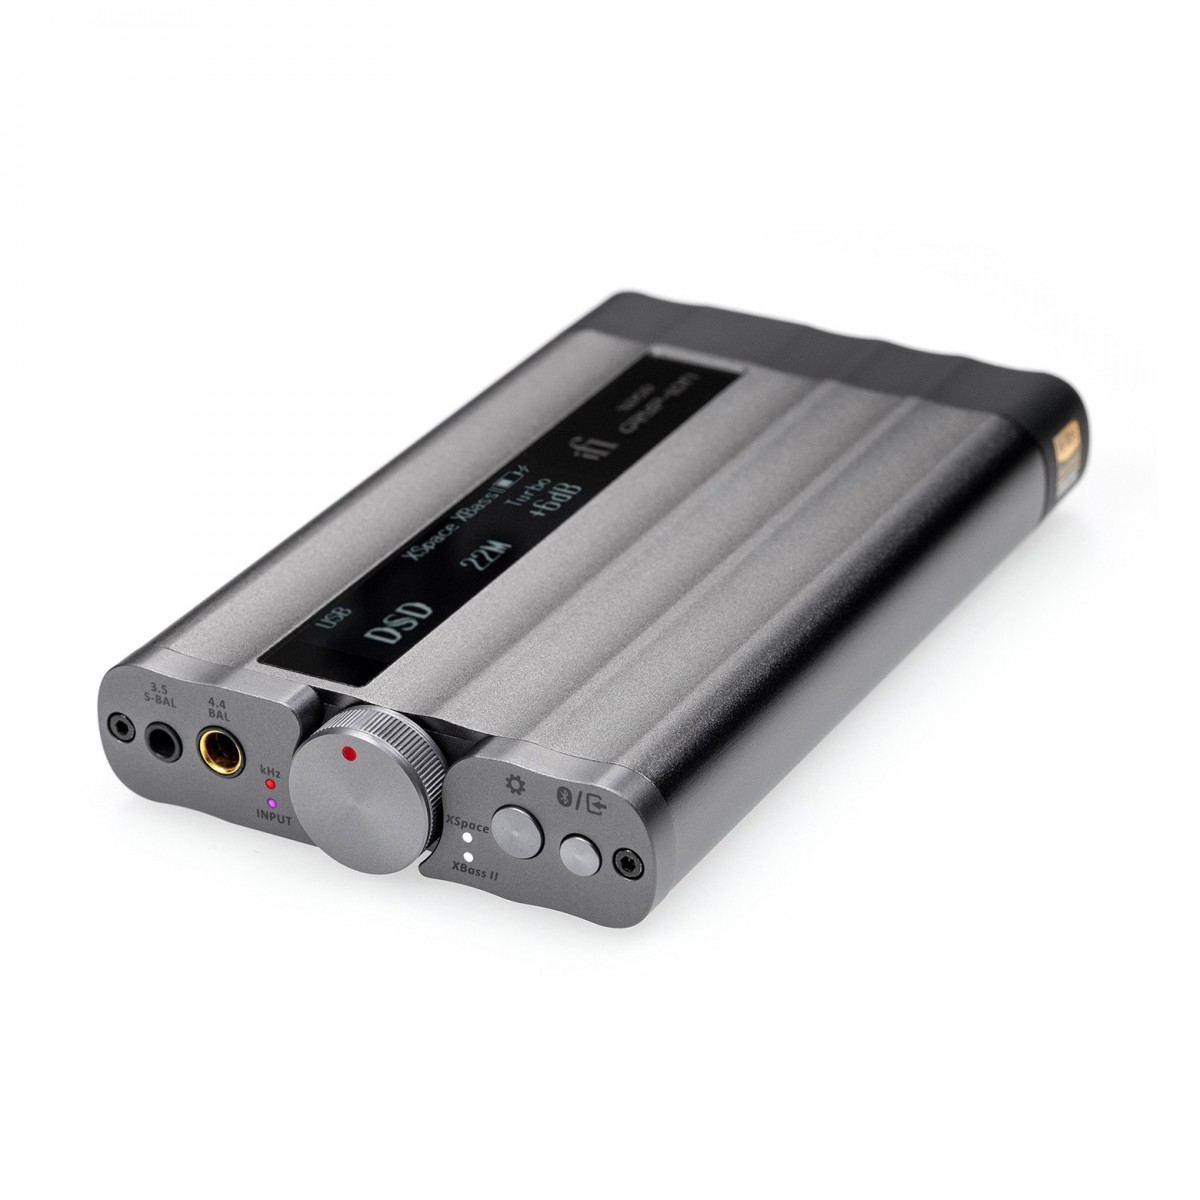 iFi xDSD Gryphon Pro Pack